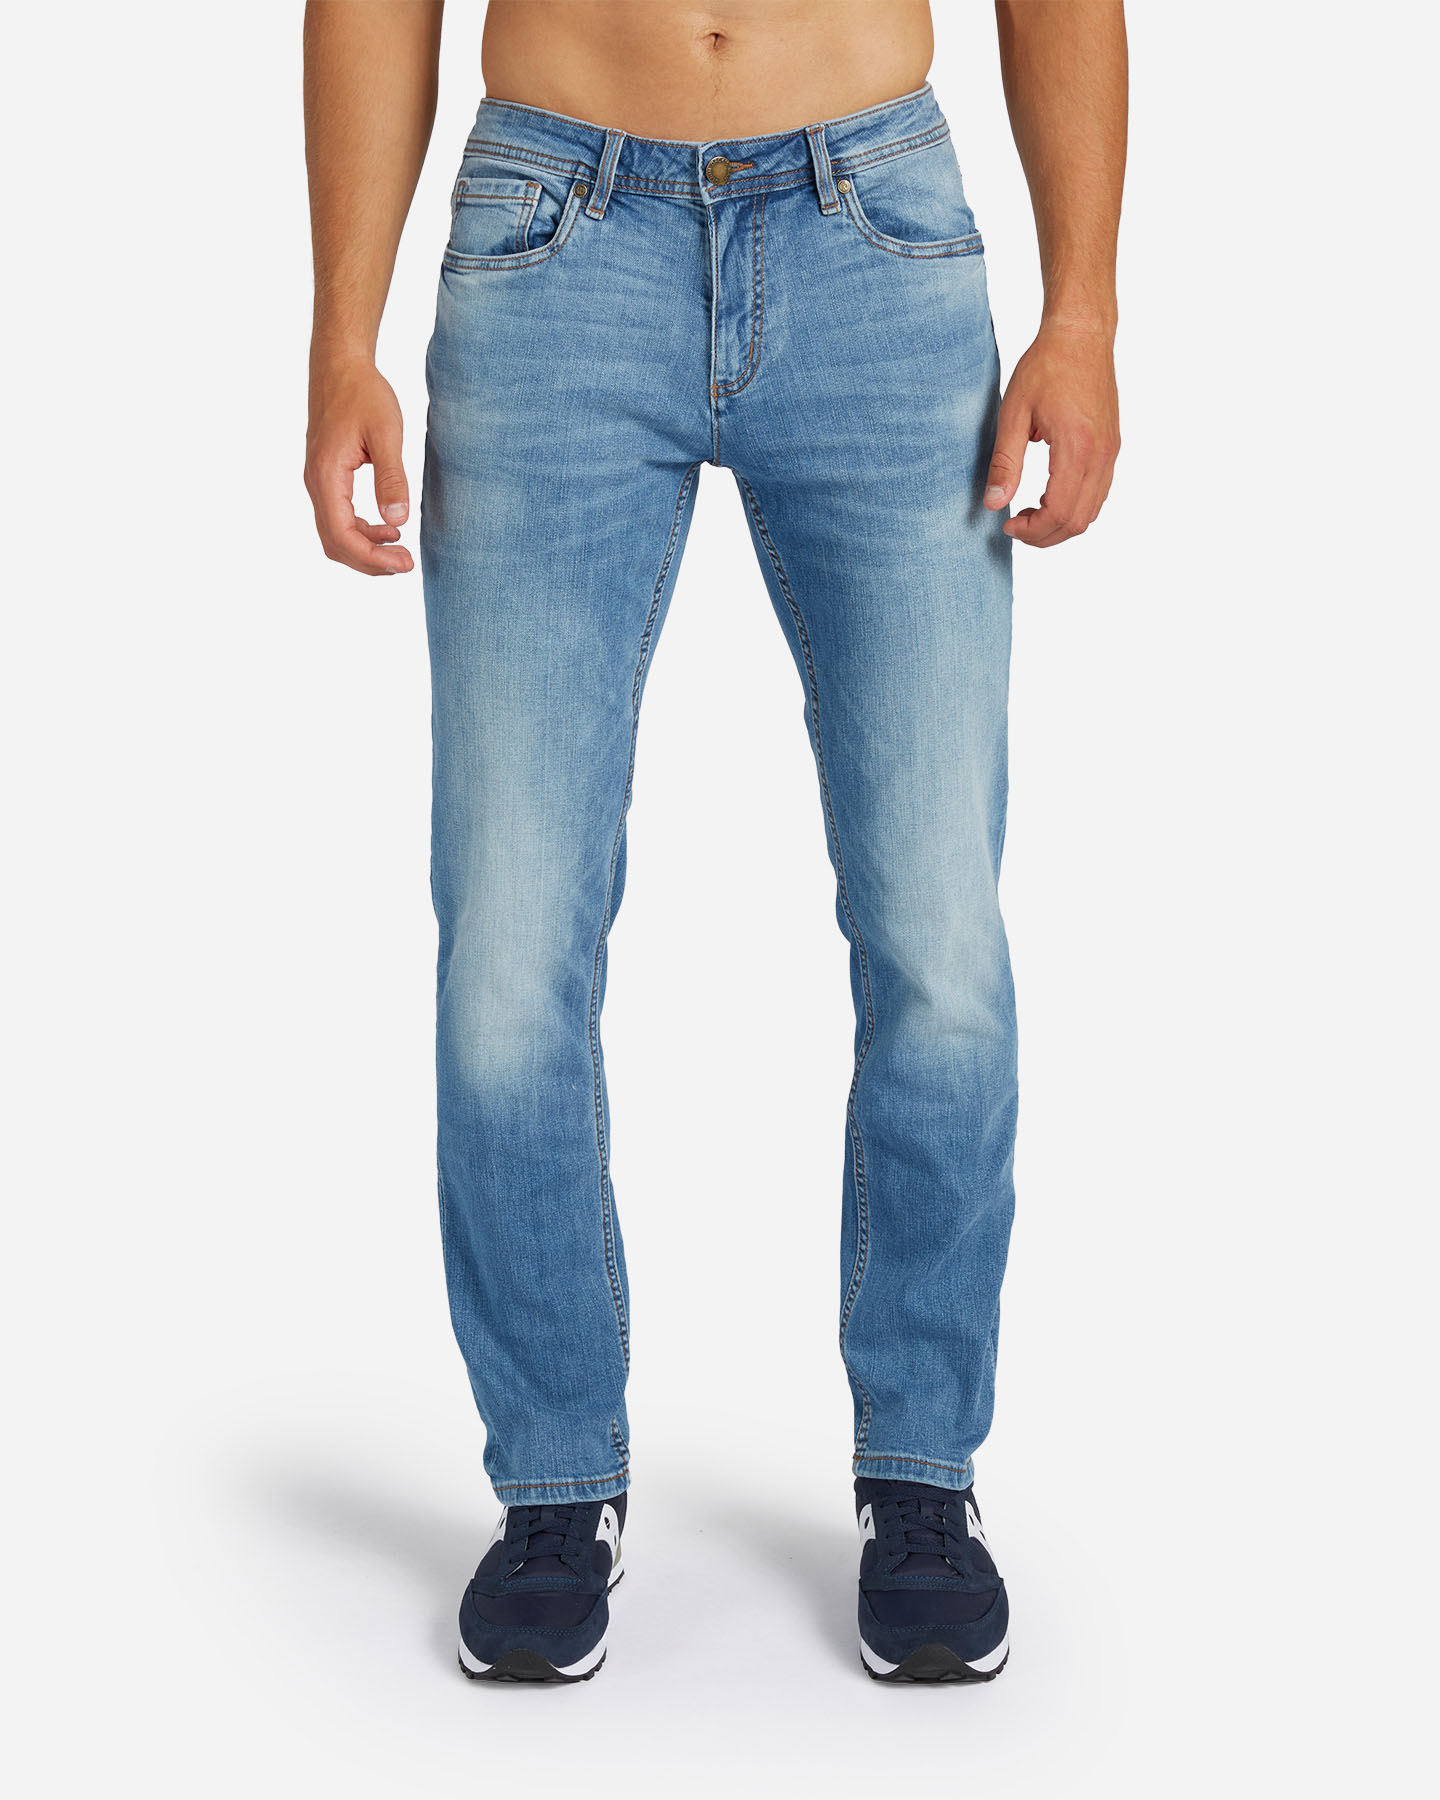 Image of Dack's Casual City M - Jeans - Uomo